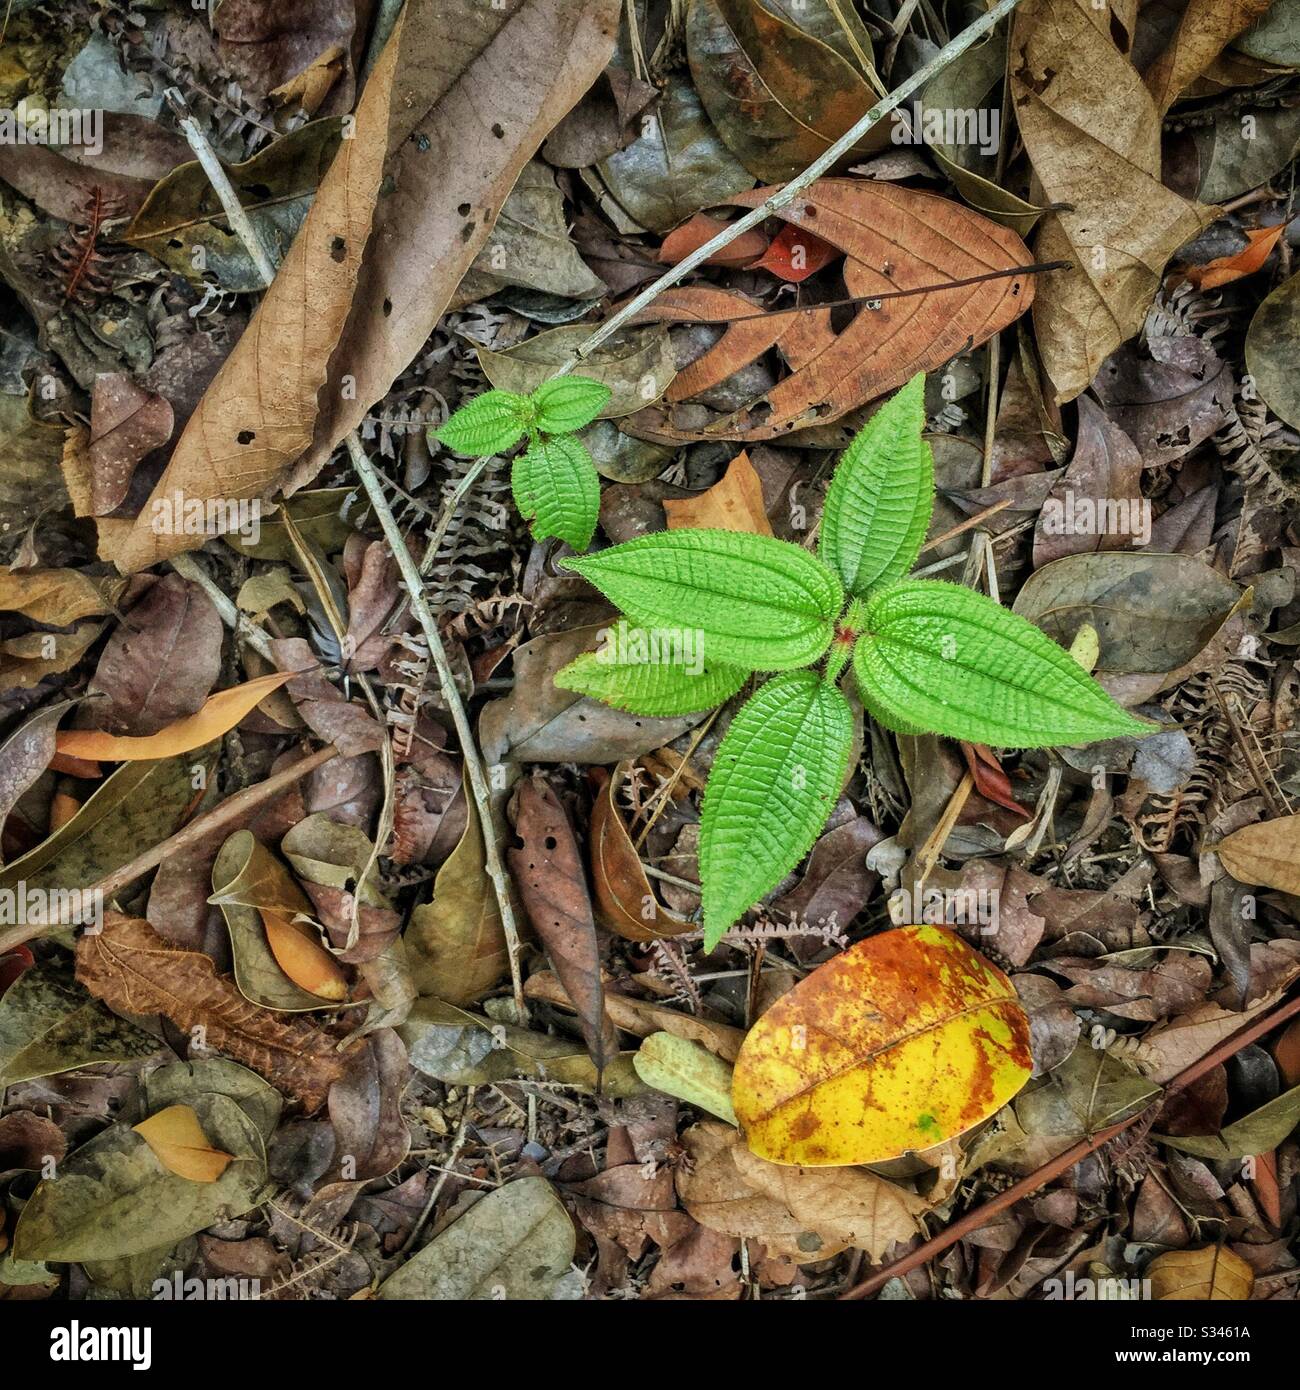 Young Clidemia hirta plants, an invasive species known as Soapbush or Koster's Curse, among fallen leaves, ferns and twigs on the forest floor, Pulau Banding (Banding Island), Perak, Malaysia Stock Photo